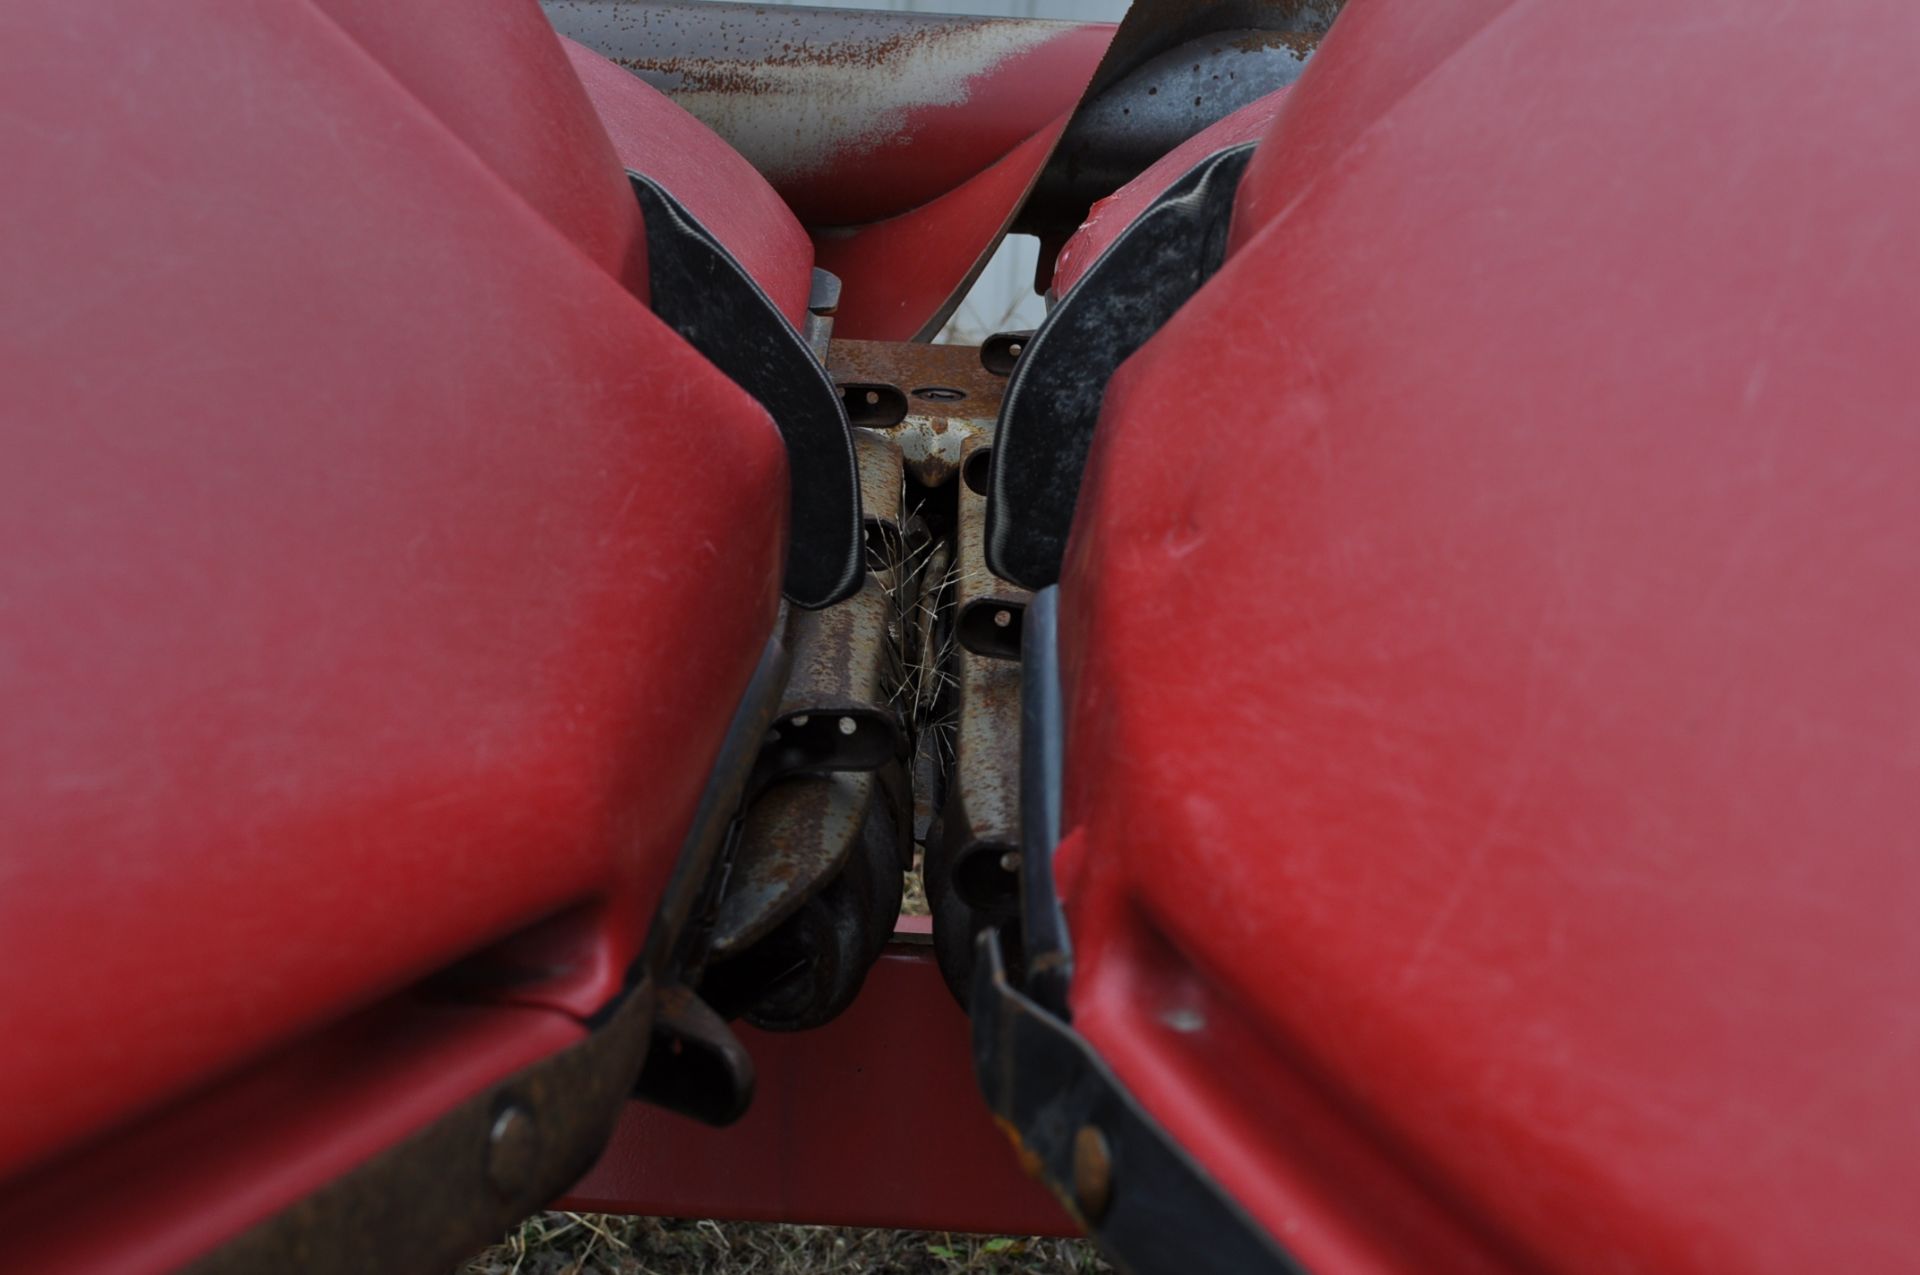 CASE IH 2208 Poly Corn Head, 8 rows x 30”, hyd deck plates, knife rolls, poly, 3 header height - Image 13 of 16